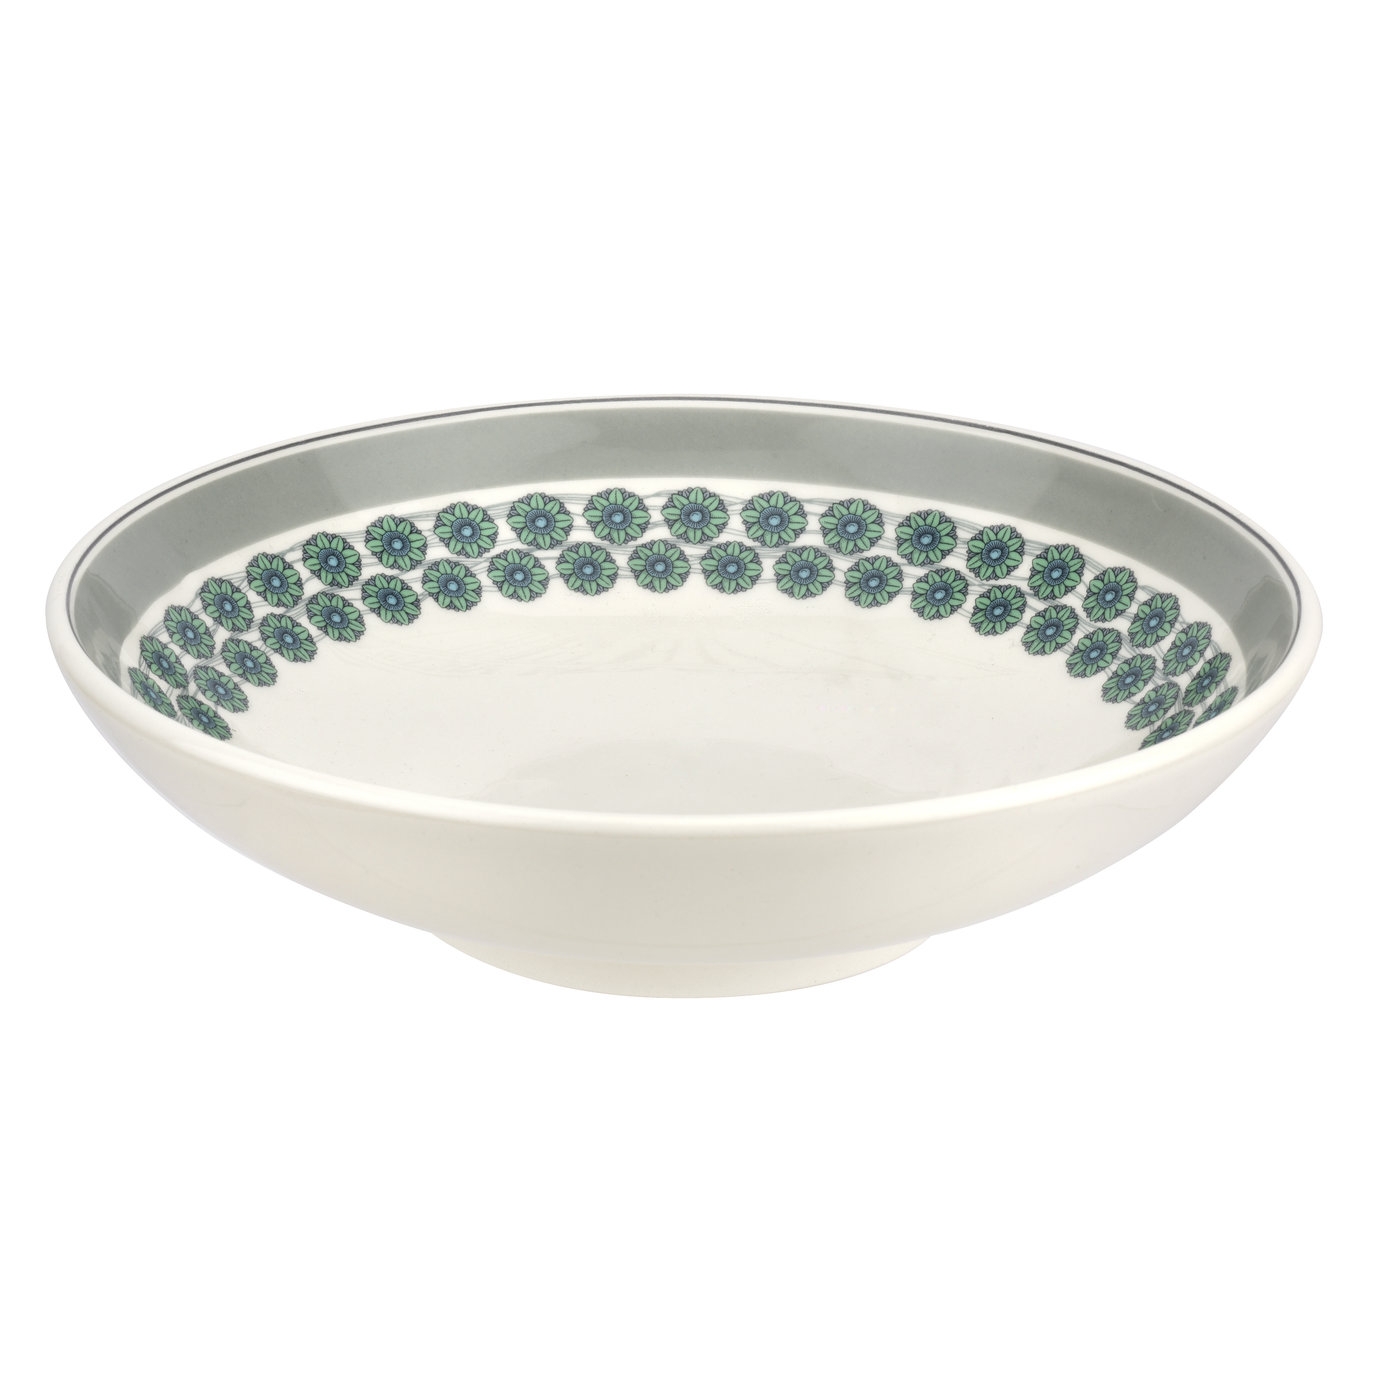 Westerly Grey 8.5 Inch Pasta Bowl image number null